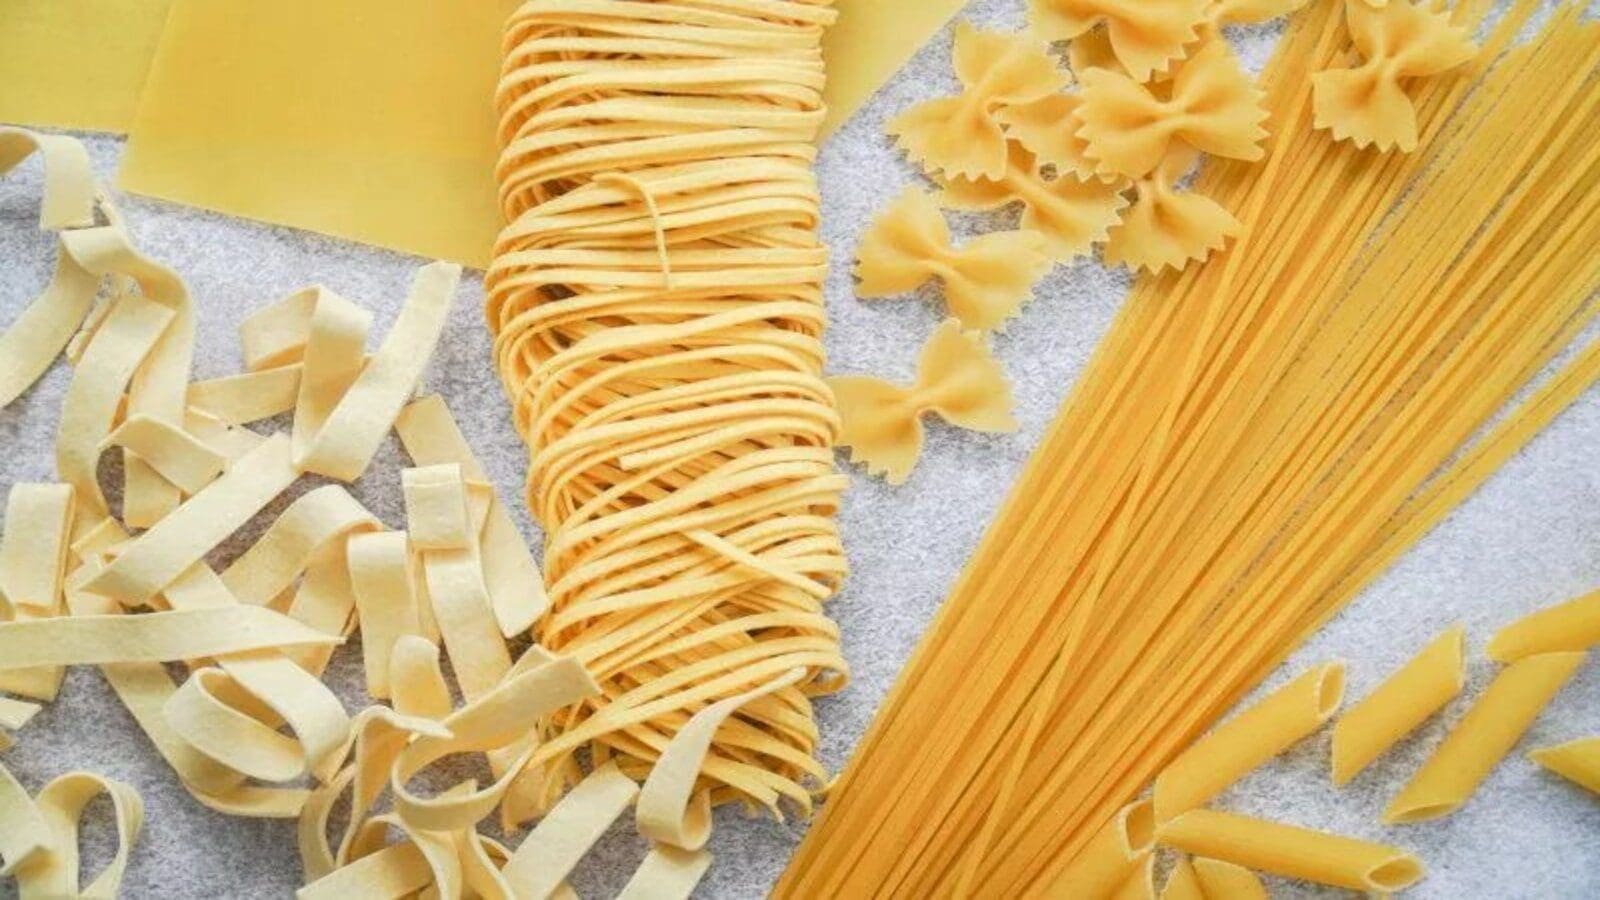 Kenya proposes of 20% excise duty on pasta in push to raise tax revenues